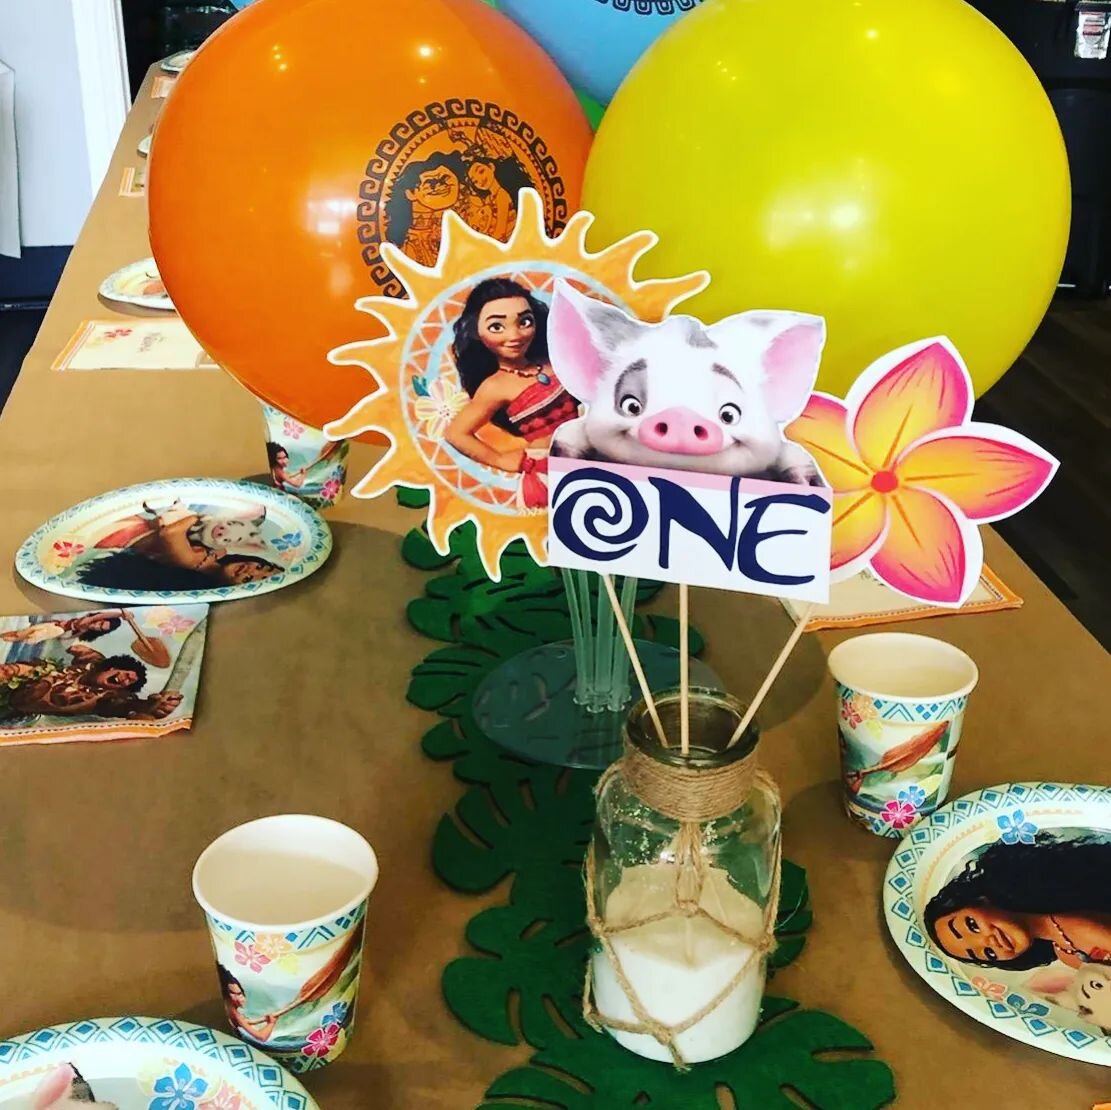 #Moana is one of our most enduring, favorite themes. In a jungle-themed playroom complete with thatched-roof hit, how can you go wrong? 

#moanaparty
#chicagokidsbirthdayparties 
#chicagokidsparty
#indoorplayroom
#chicagoplayroom
#grandmonkeypackage